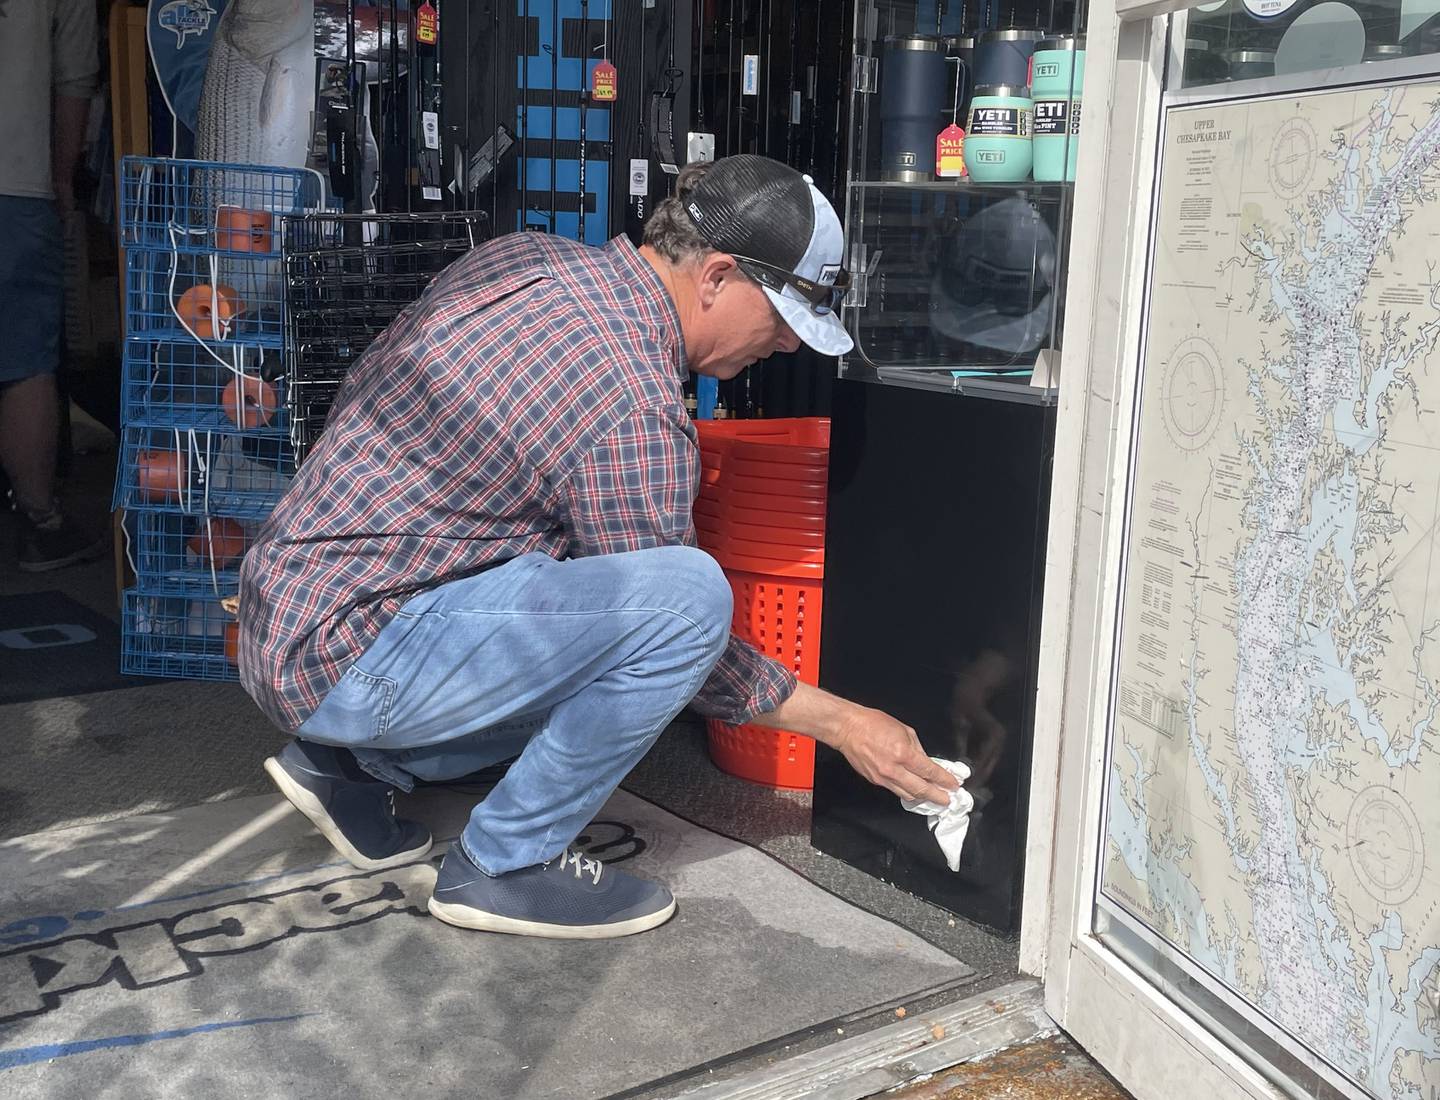 Keith Fraser, owner of alltackle.com, wipes blood stains from a case inside the doorway of his business on Friday, May 5, 2023. Just after 2 p.m. a man seeking help for gunshot wounds entered the threshold. He was taken to a hospital by ambulance where he later died.